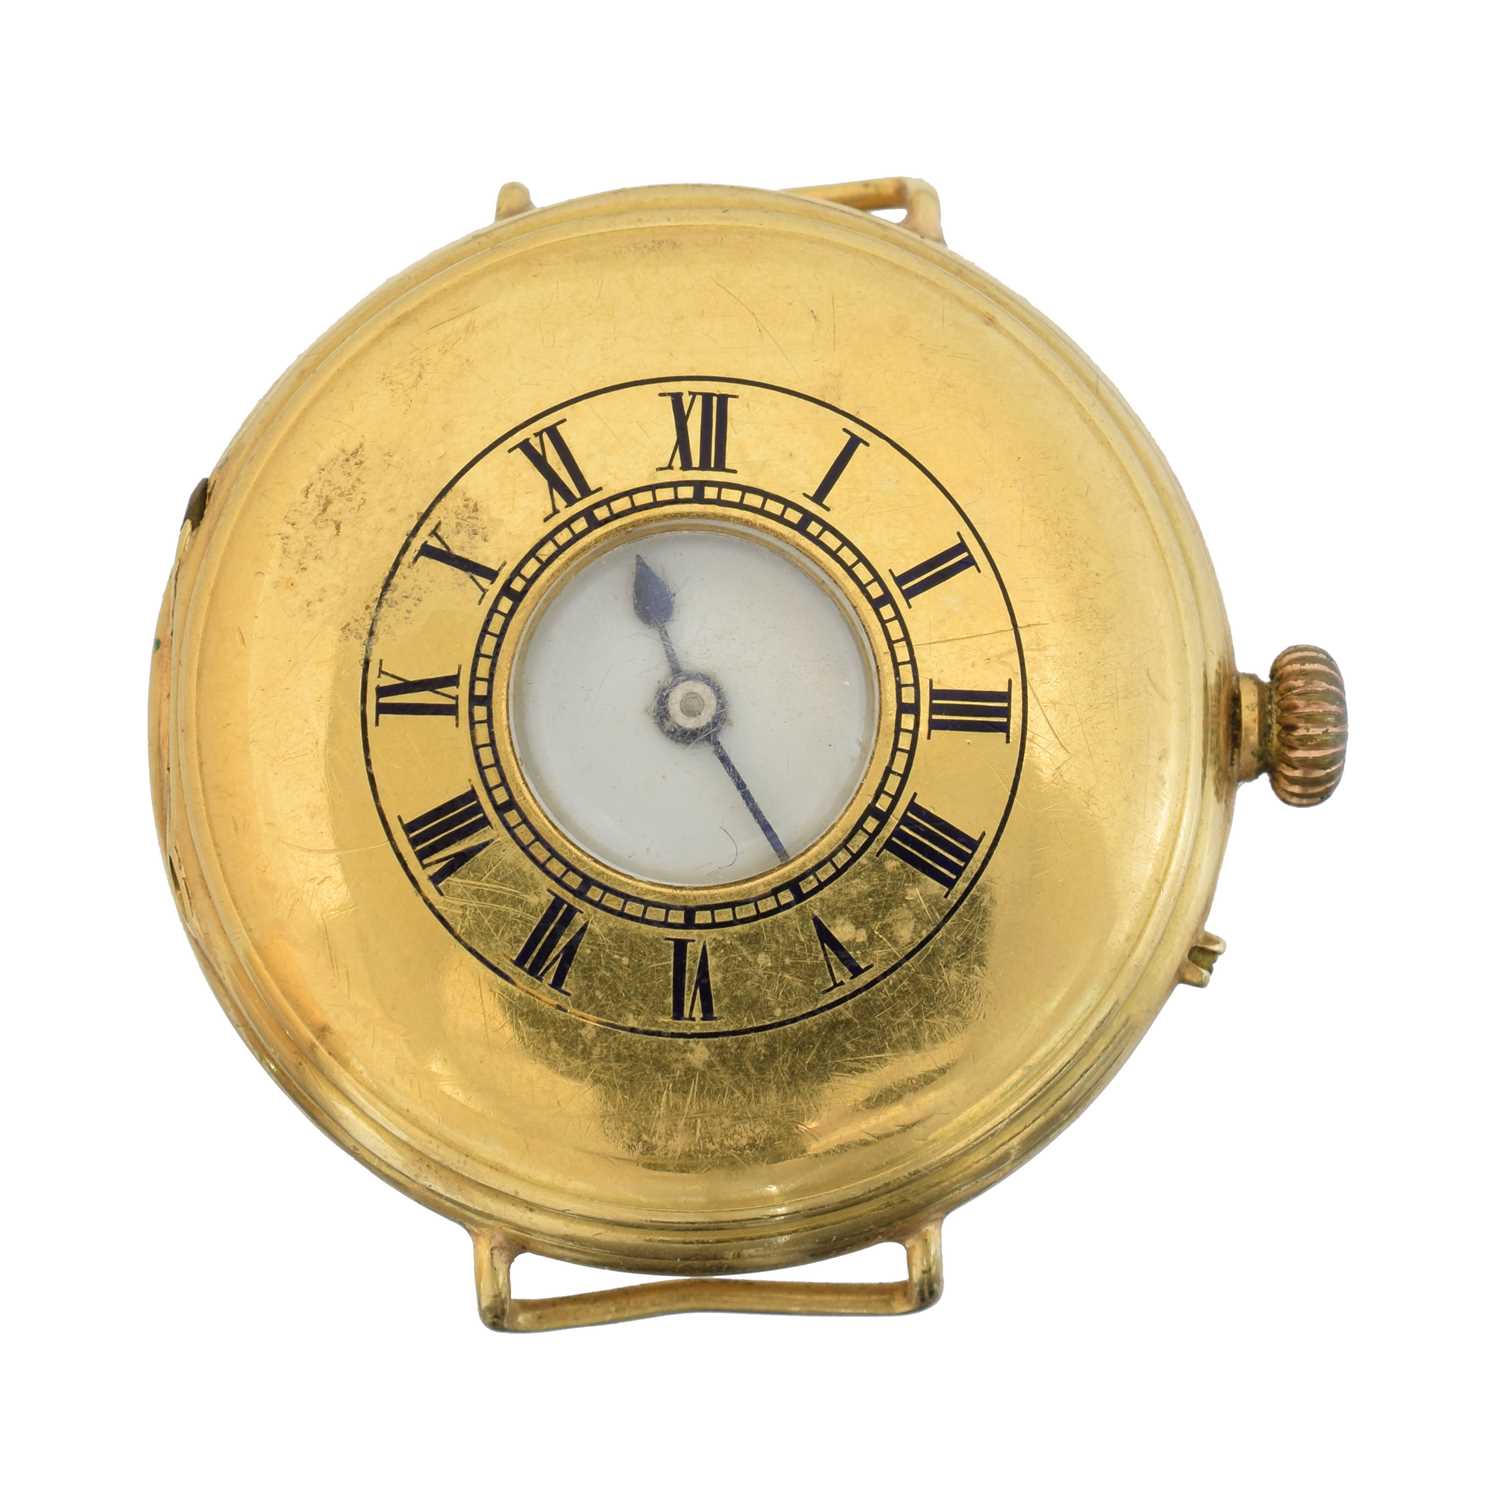 Lot 166 - An 18ct gold half hunter pocket watch by Hunt & Roskell